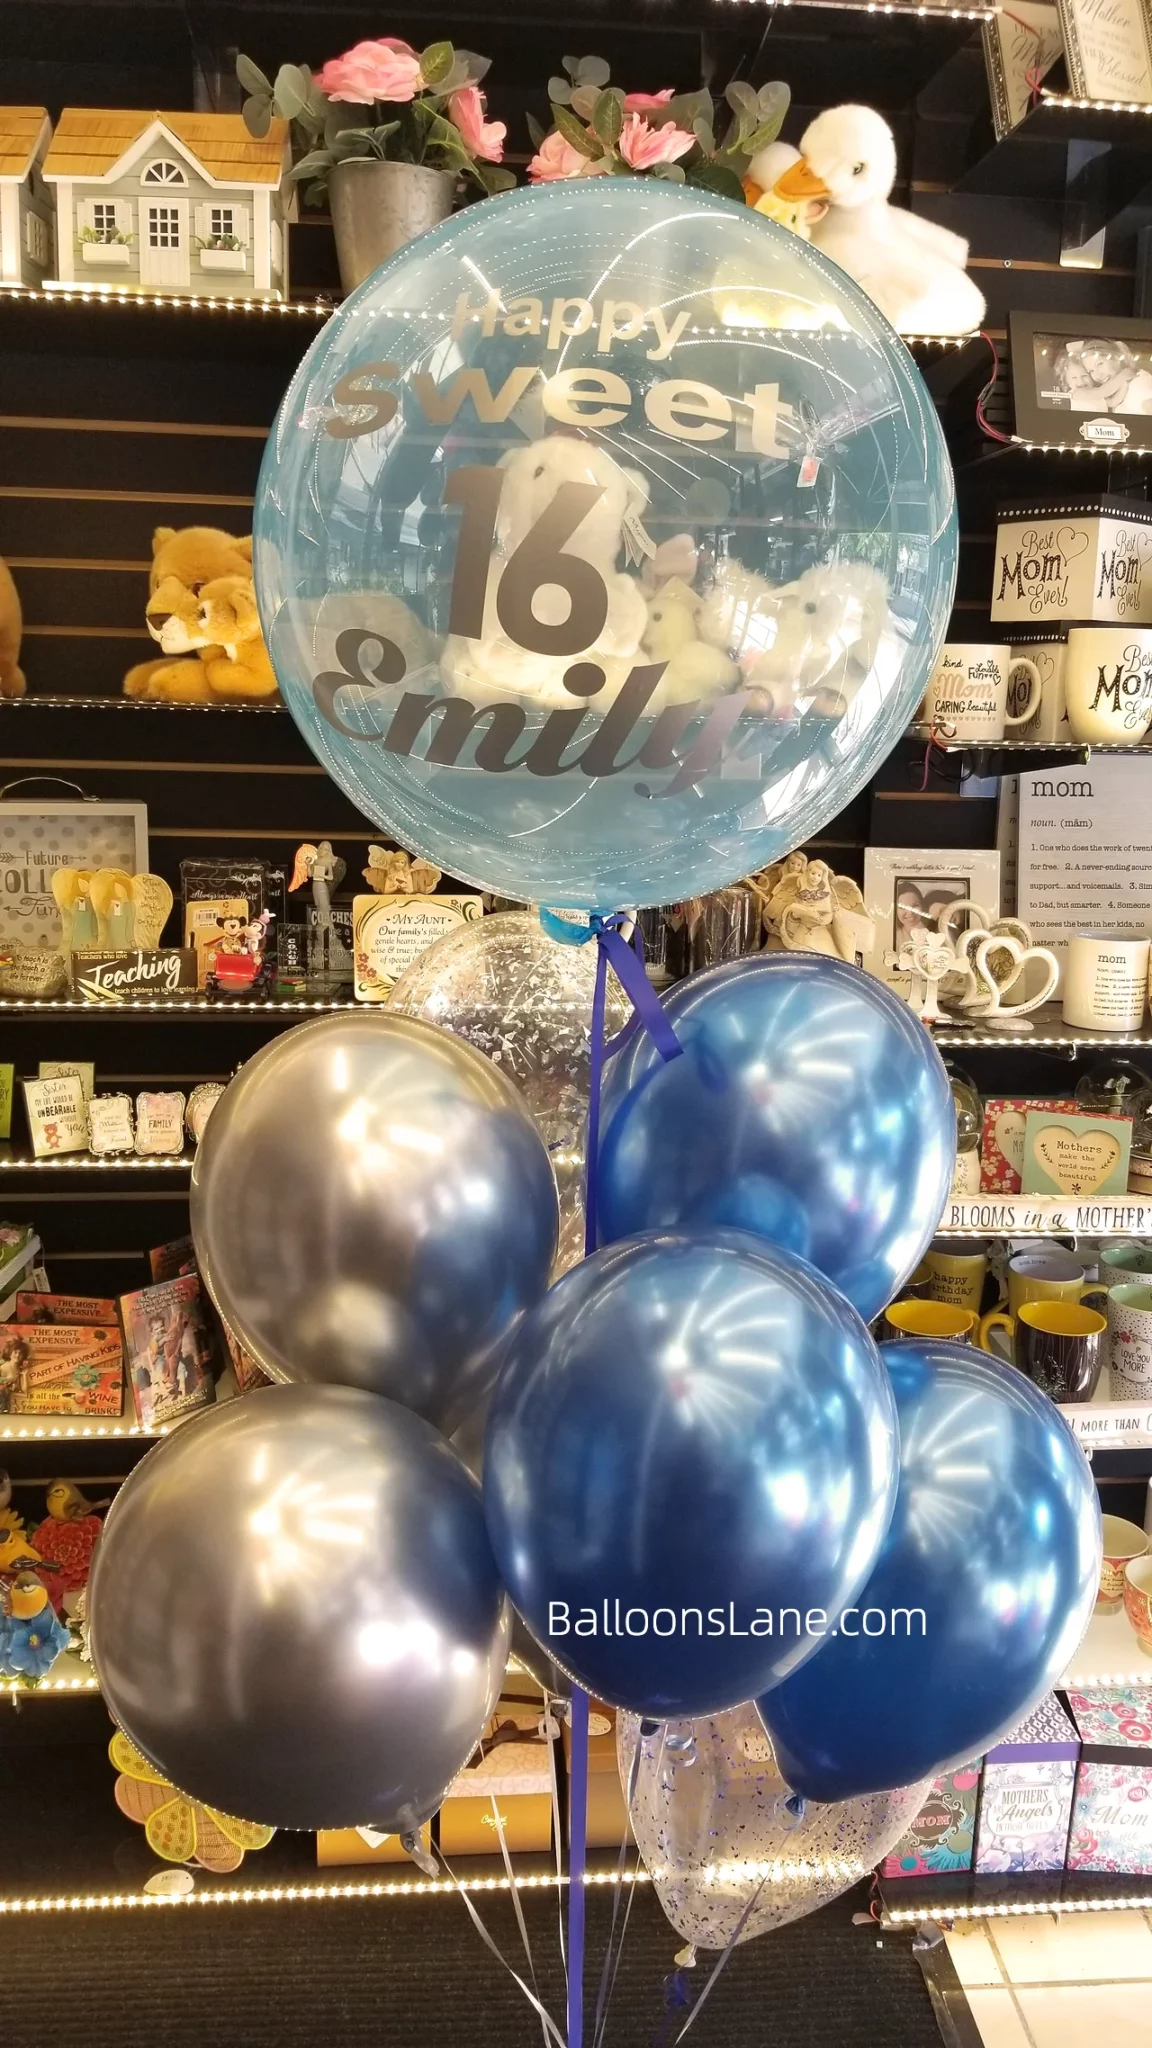 A customized clear balloon bouquet with blue and white balloons, accompanied by blue confetti balloons